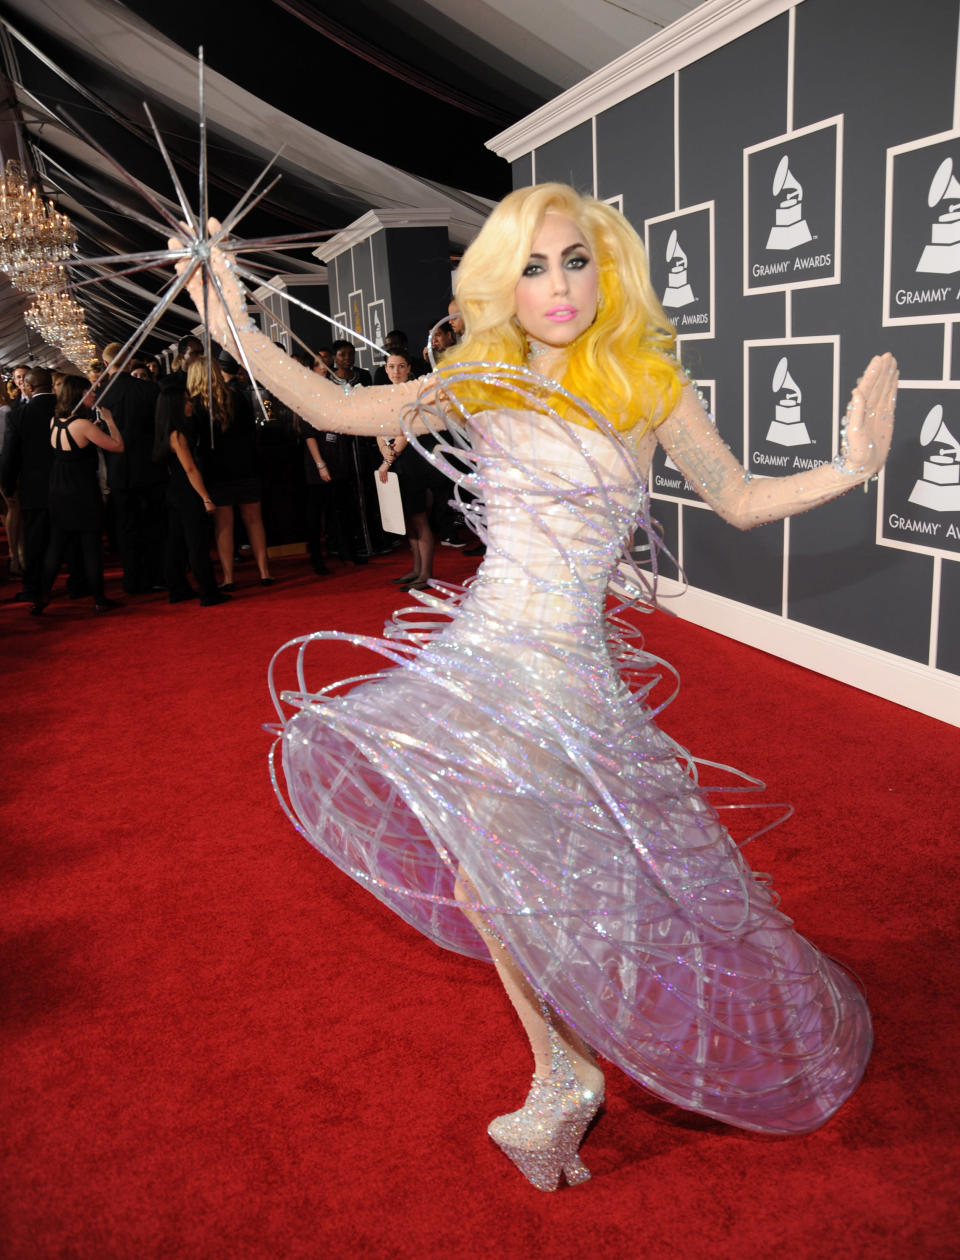 Lady Gaga at the 2010 GRAMMYs is what this whole business is all about: the glittering, fantastically bizarre Armani confection, constructed to look as if it was actually orbiting the singer’s body, and accessorized with a giant, spiky metal star, extraterrestrial-looking studded footwear, and a cartoonishly perfect face of Barbie makeup framed by a full head of ombre platinum and yellow hair. (Photo by Kevin Mazur/WireImage)